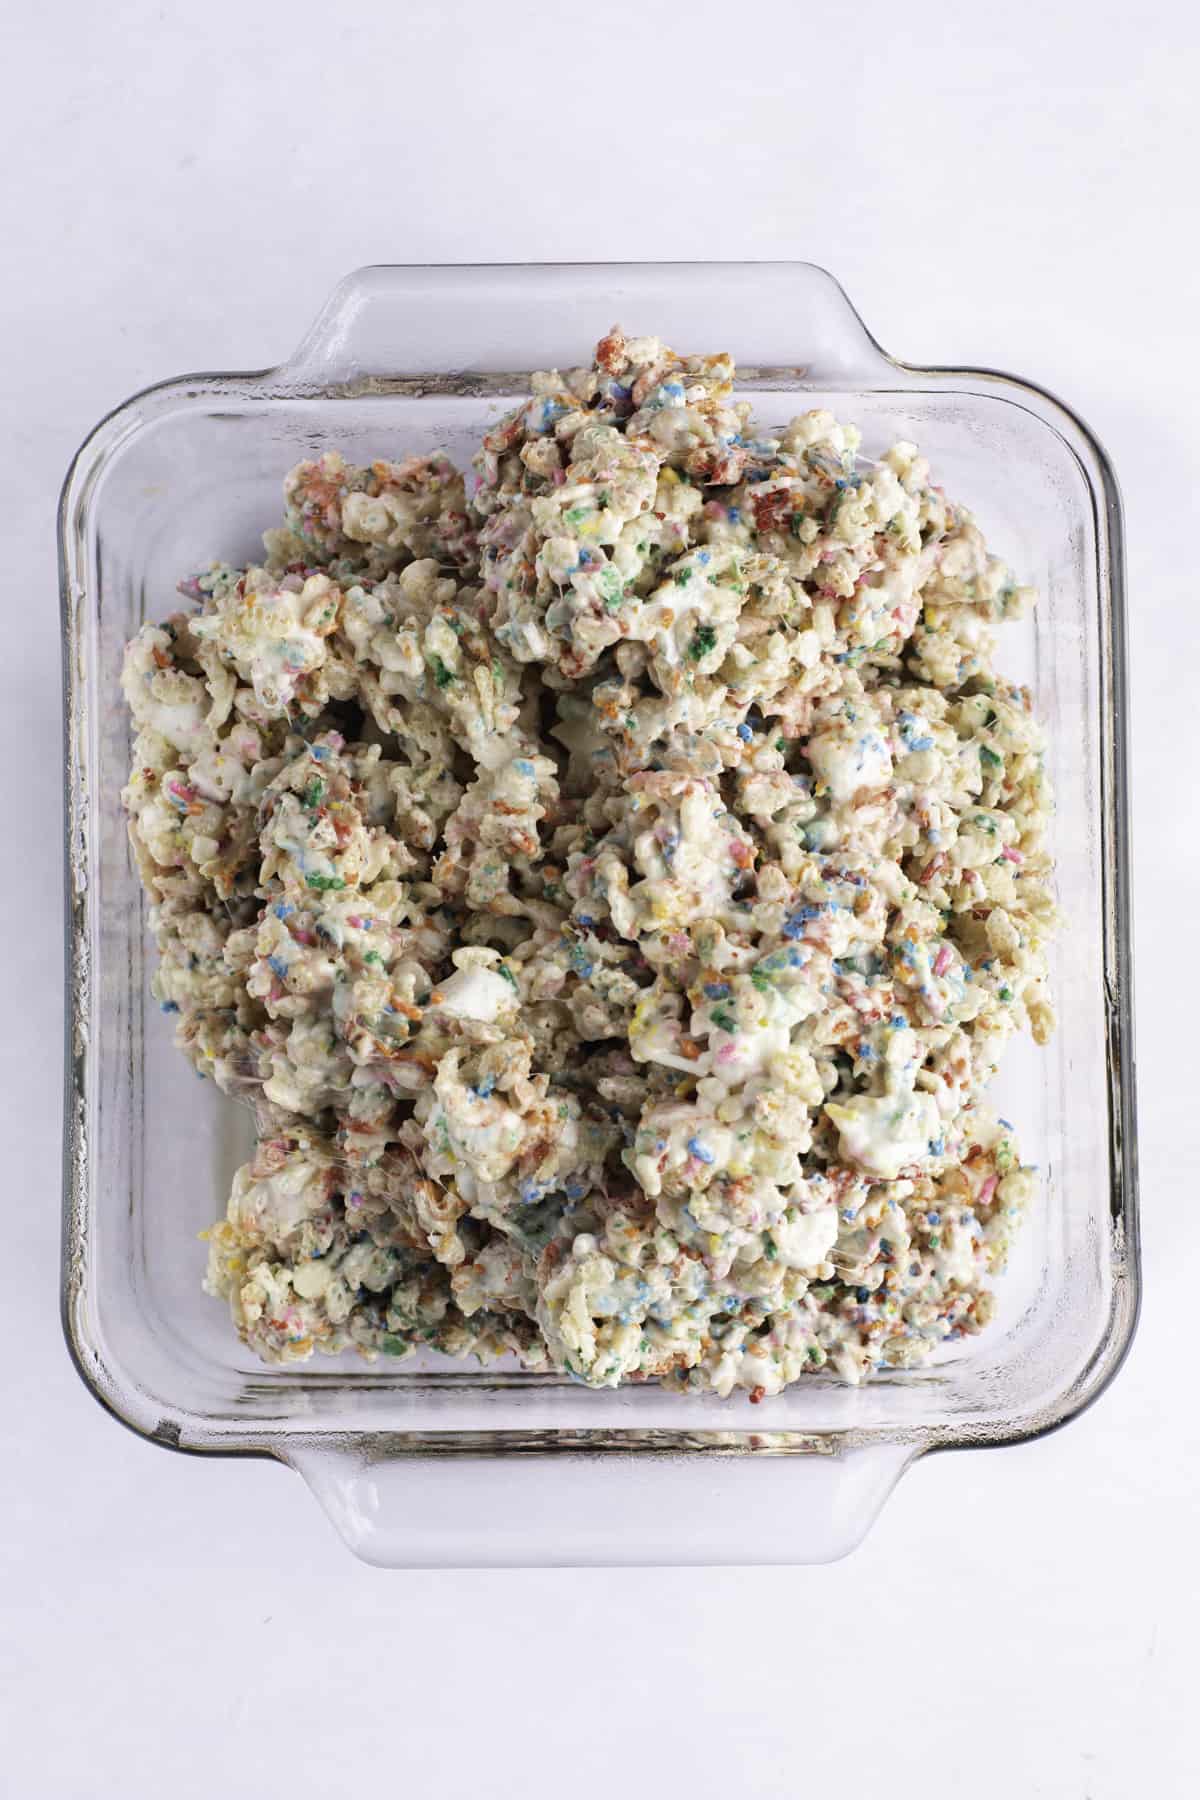 Funfetti rice krispie treat mixture being placed into a pan